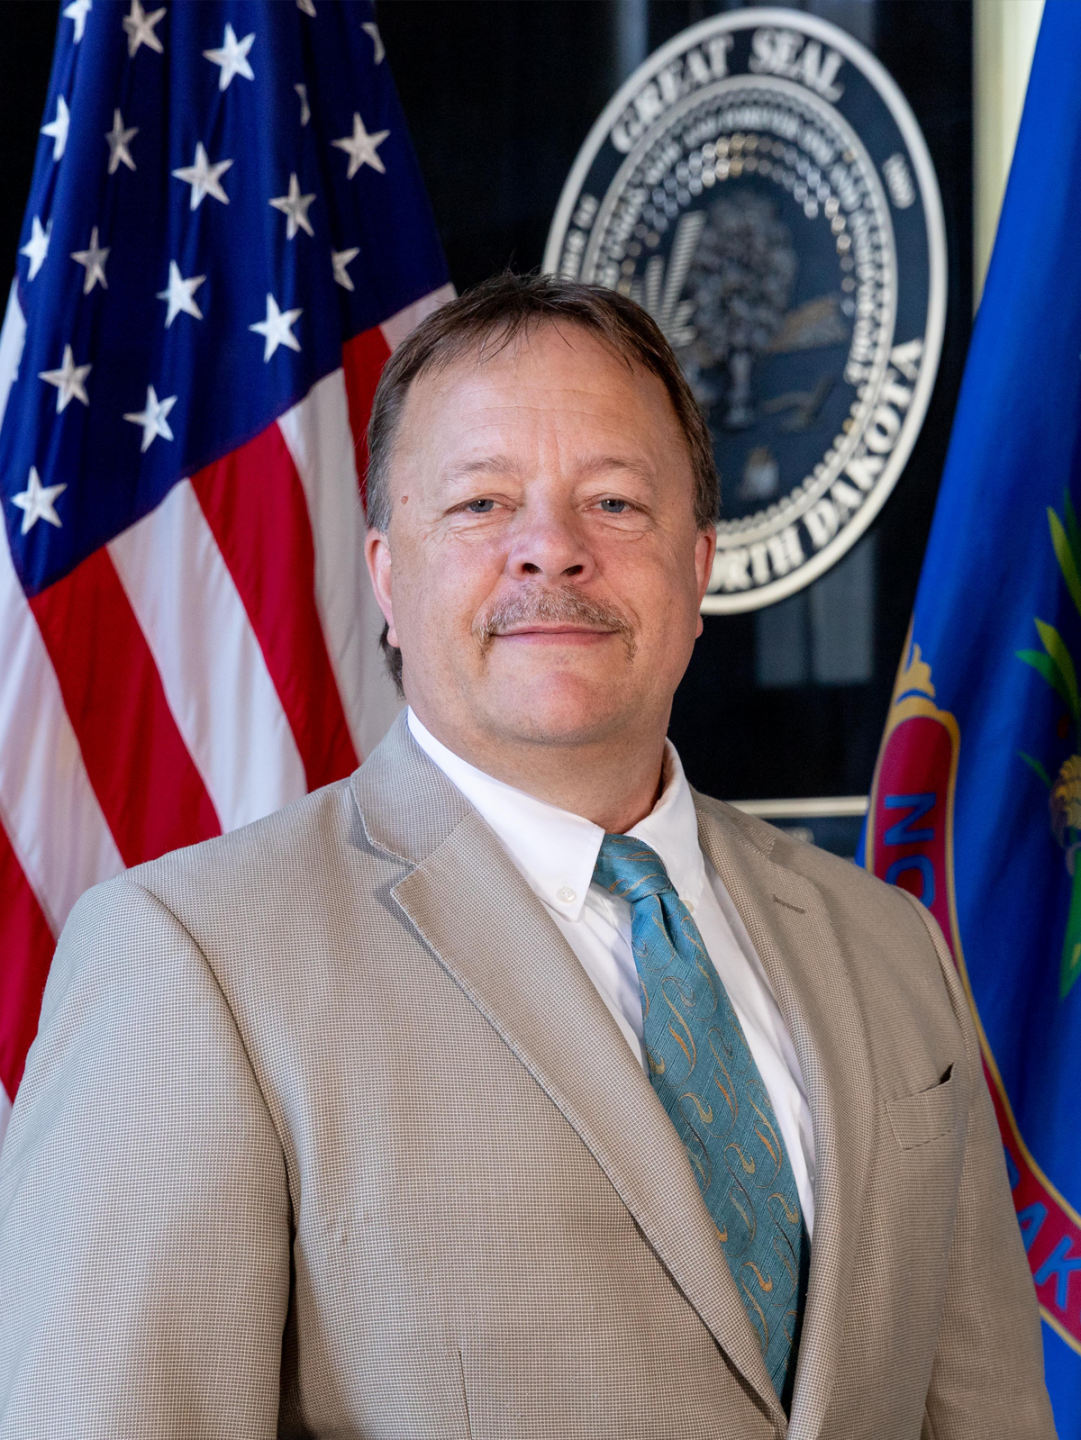 Image of Governor Henke Ron standing in front of the great seal and national flag.